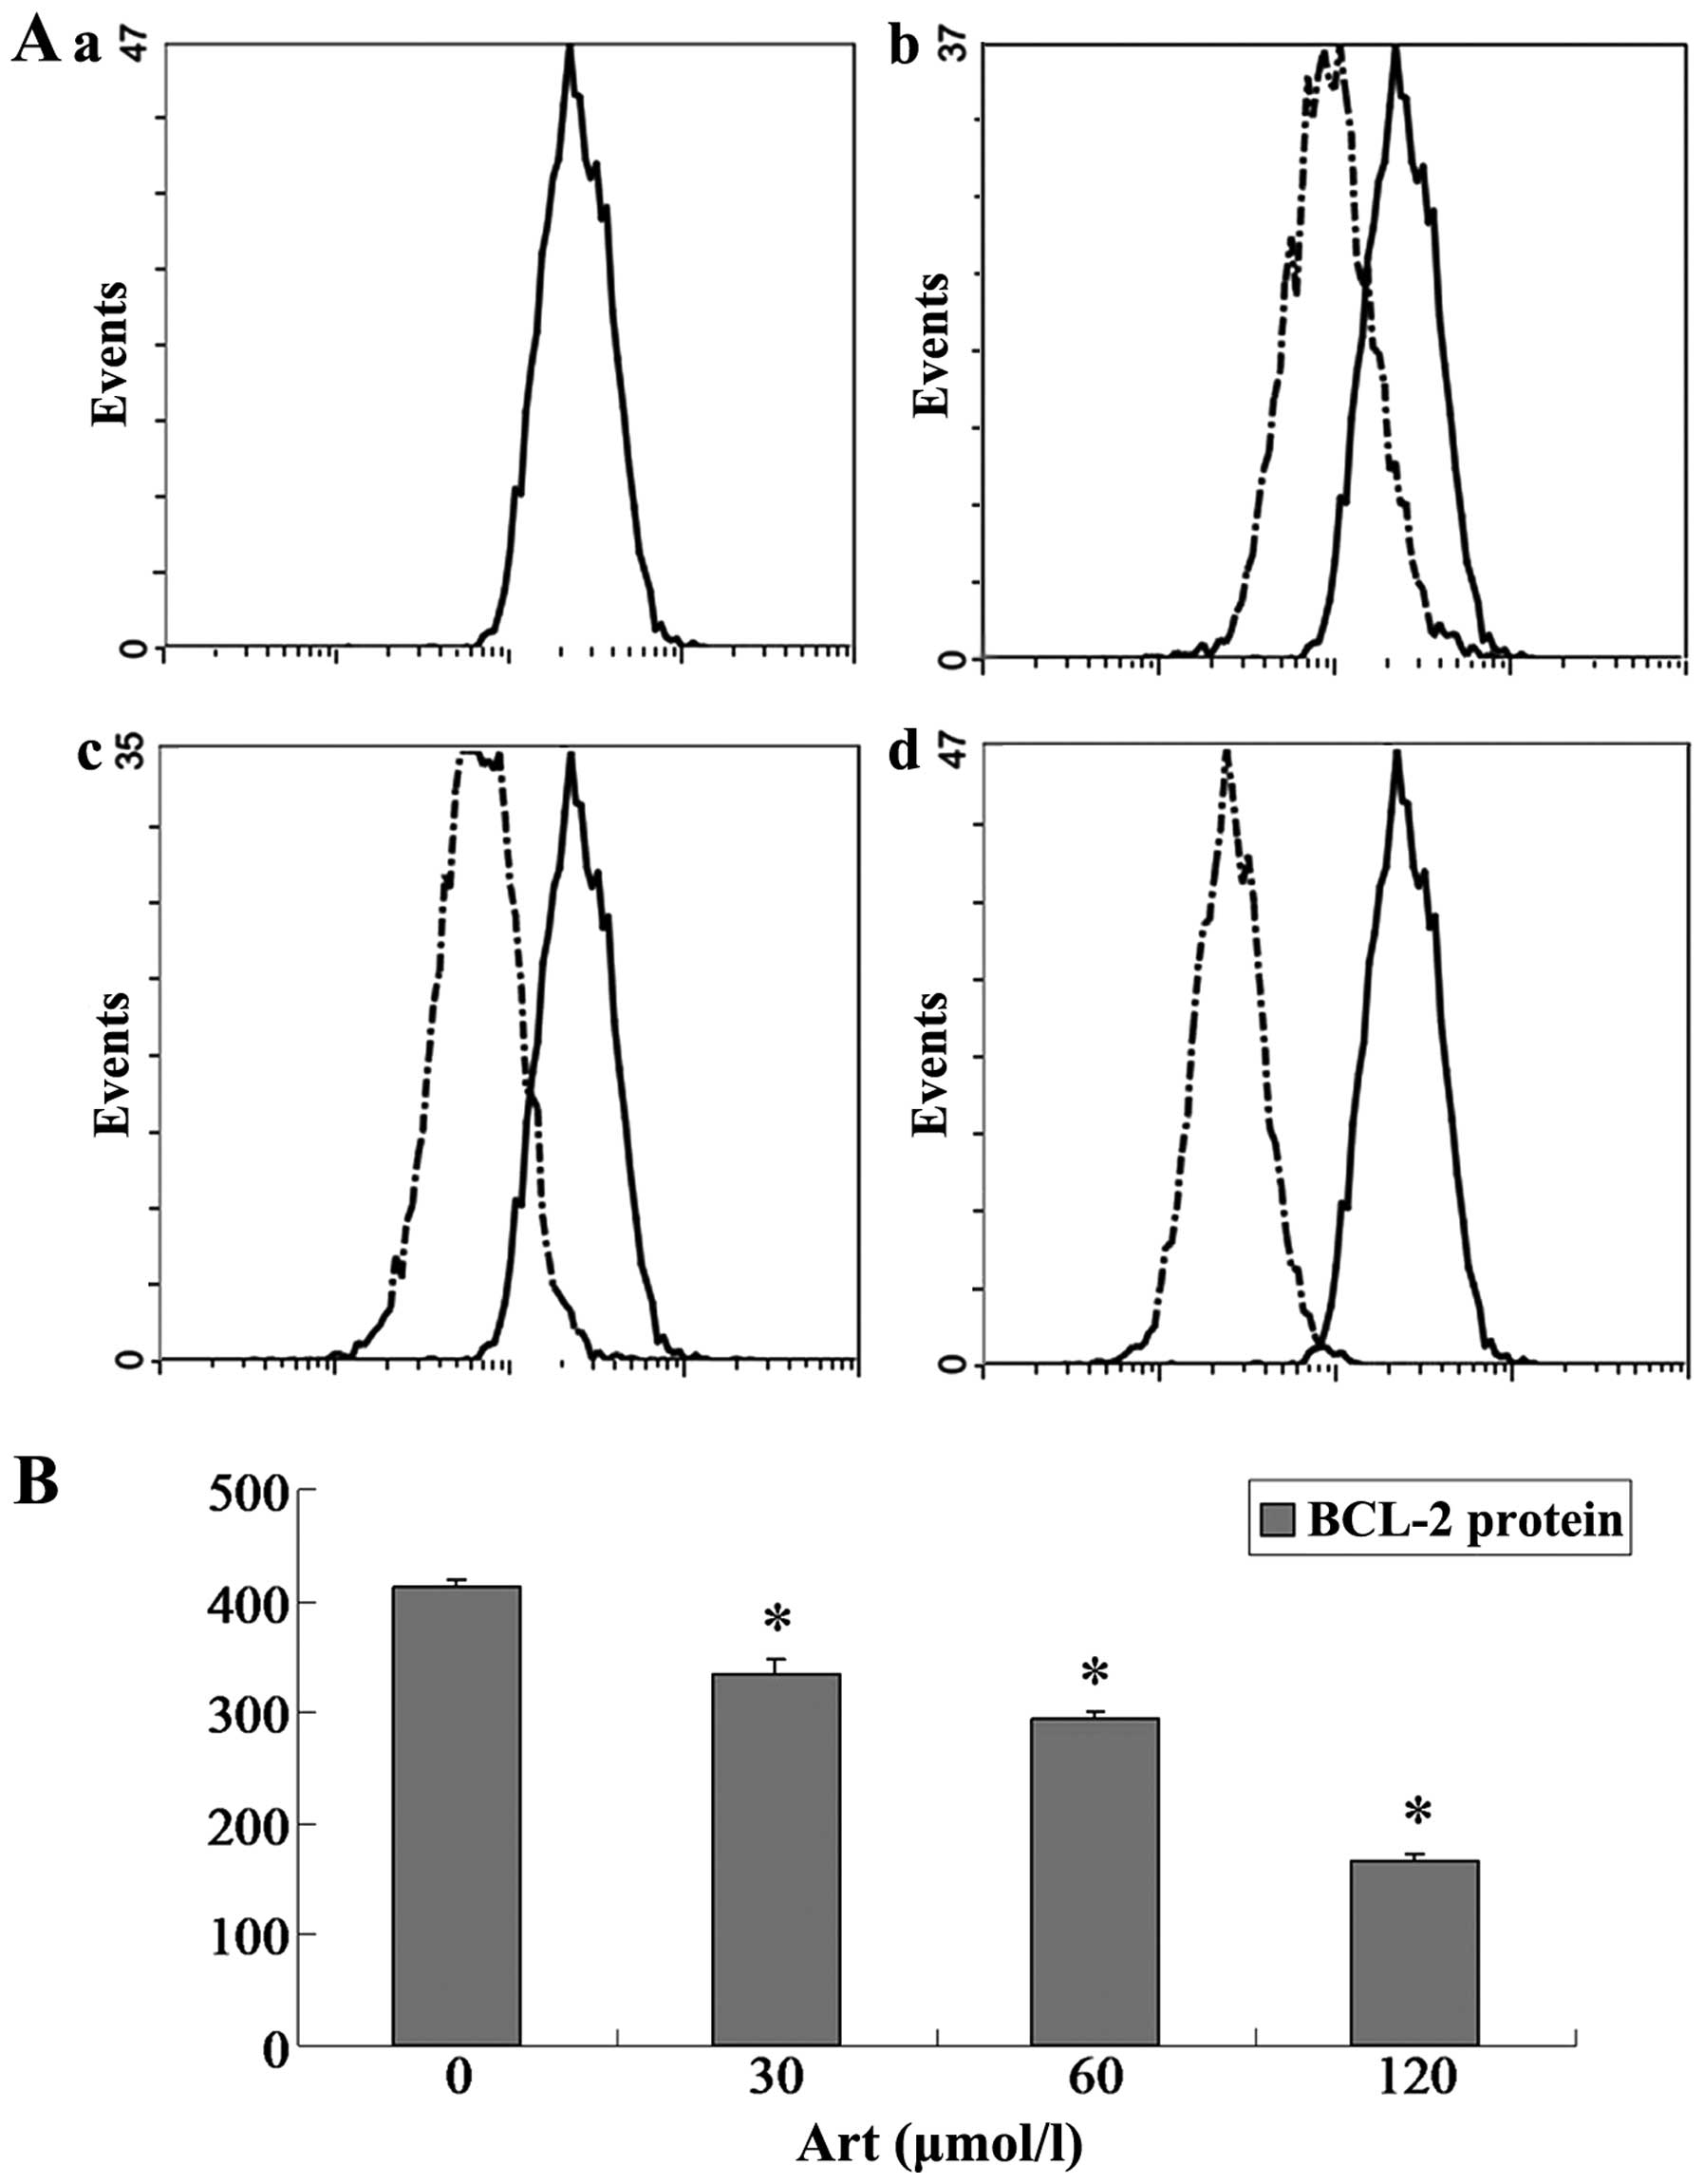 Artesunate induces apoptosis and inhibits growth of Eca109 